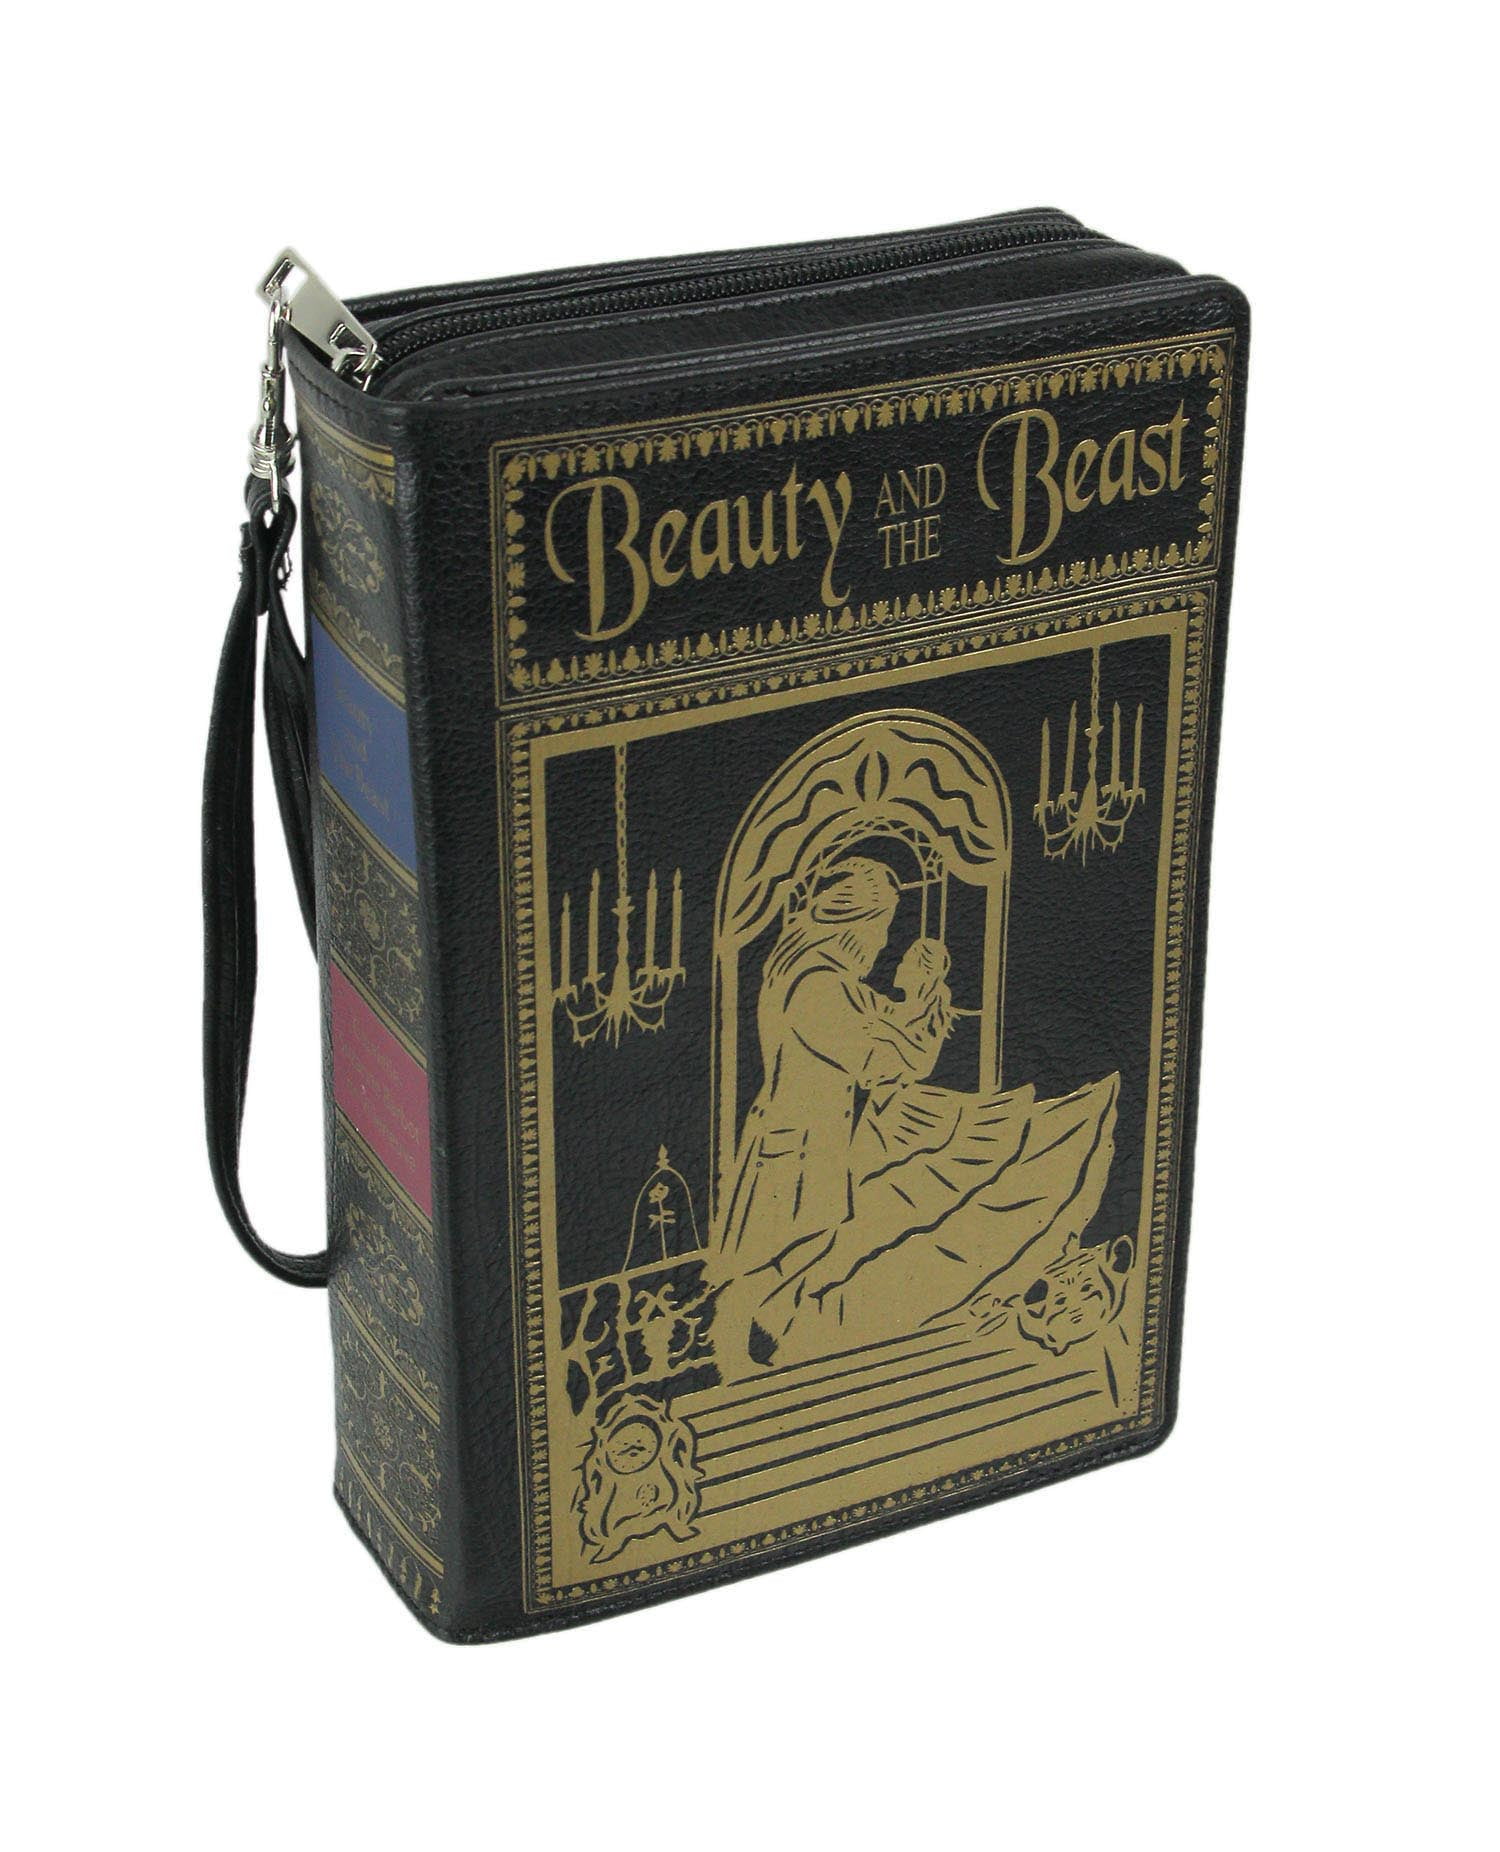 Disney Beauty and the Beast Book Crossbody Bag Purse Blue Clutch Faux Leather 